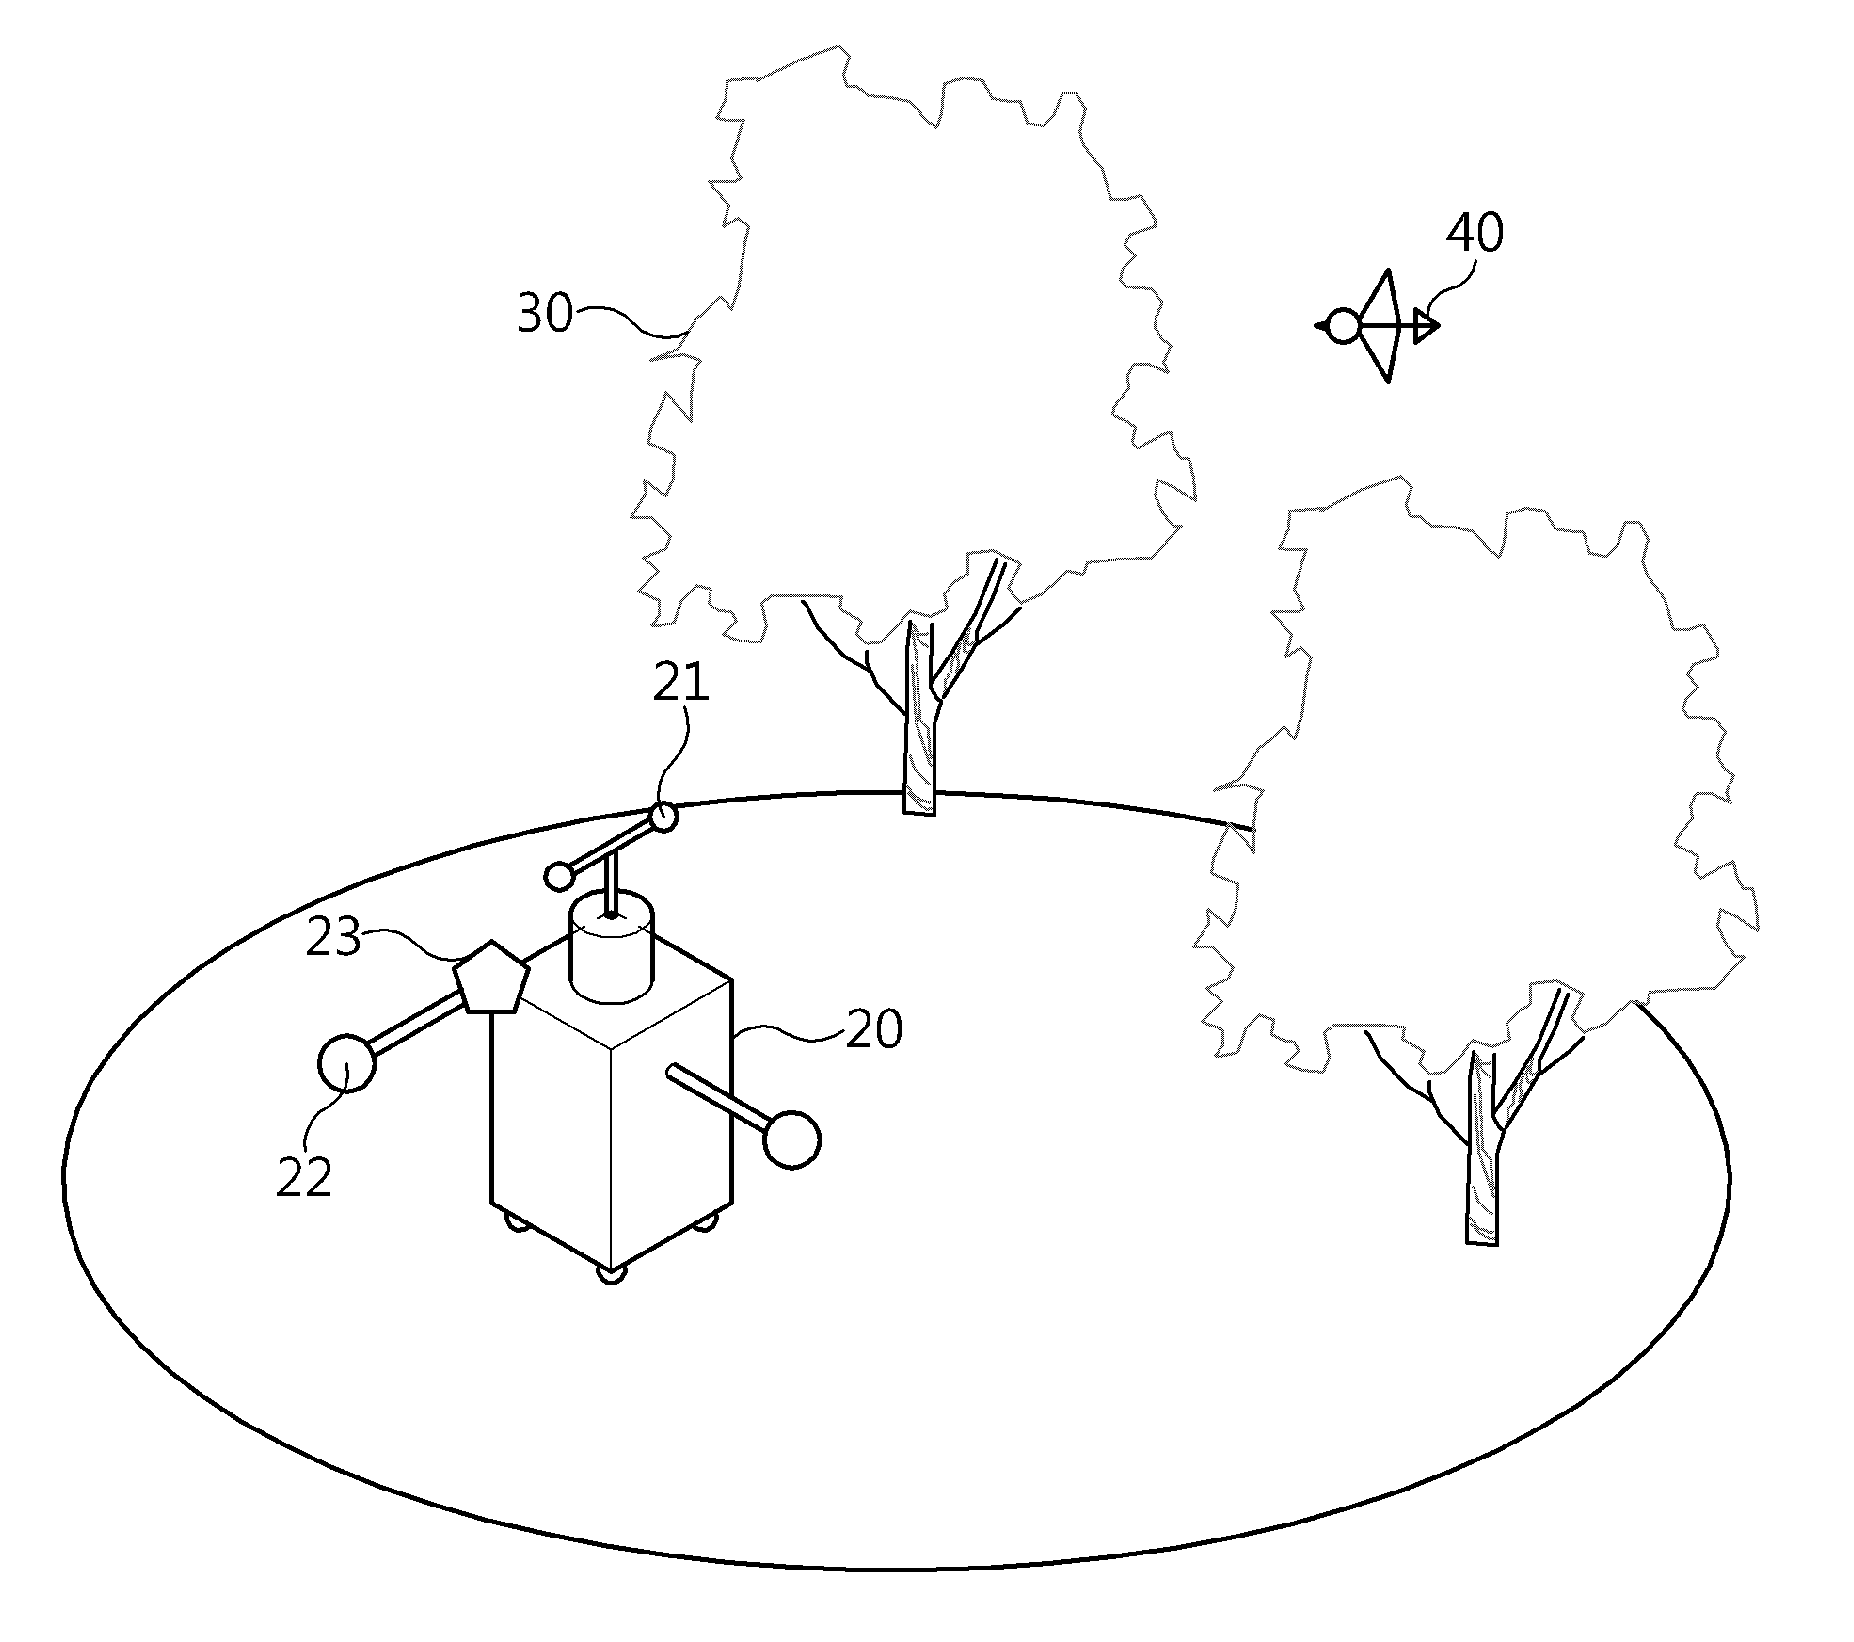 Apparatus and method for generating telepresence